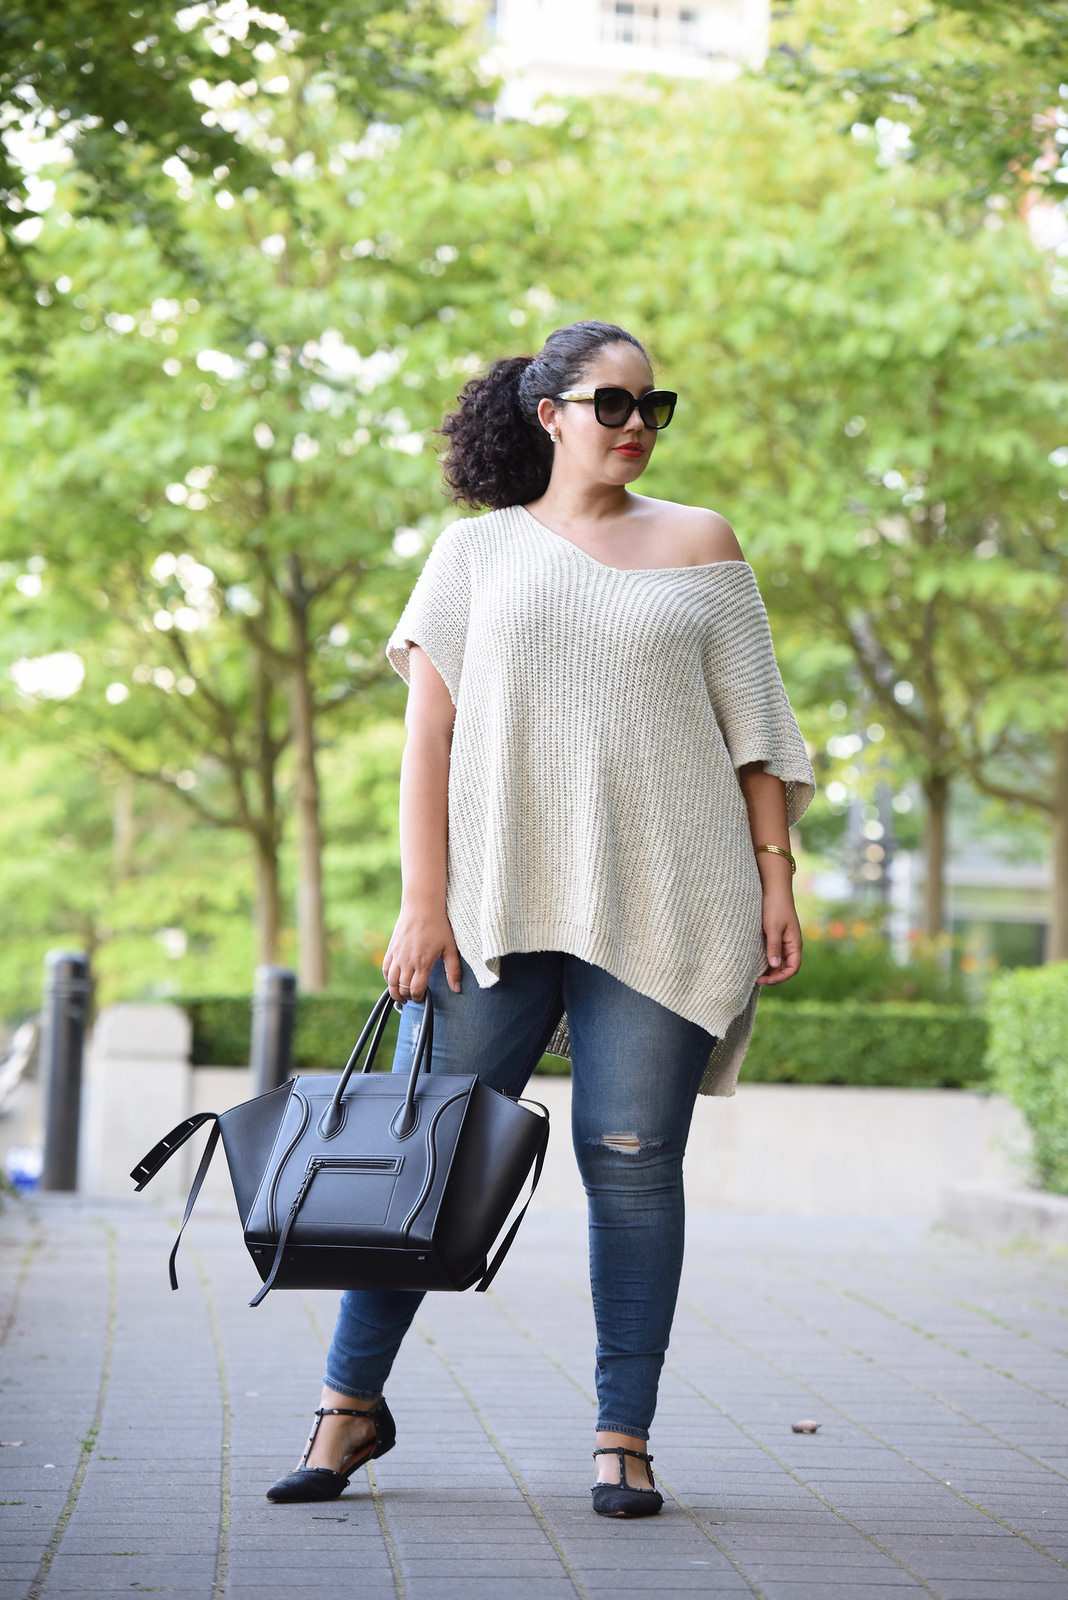 Tanesha Awasthi (formerly known as Girl with Curves) wearing an off the shoulder sweater, distressed jeans, flats and Celine Phantom bag at the park in downtown Vancouver.